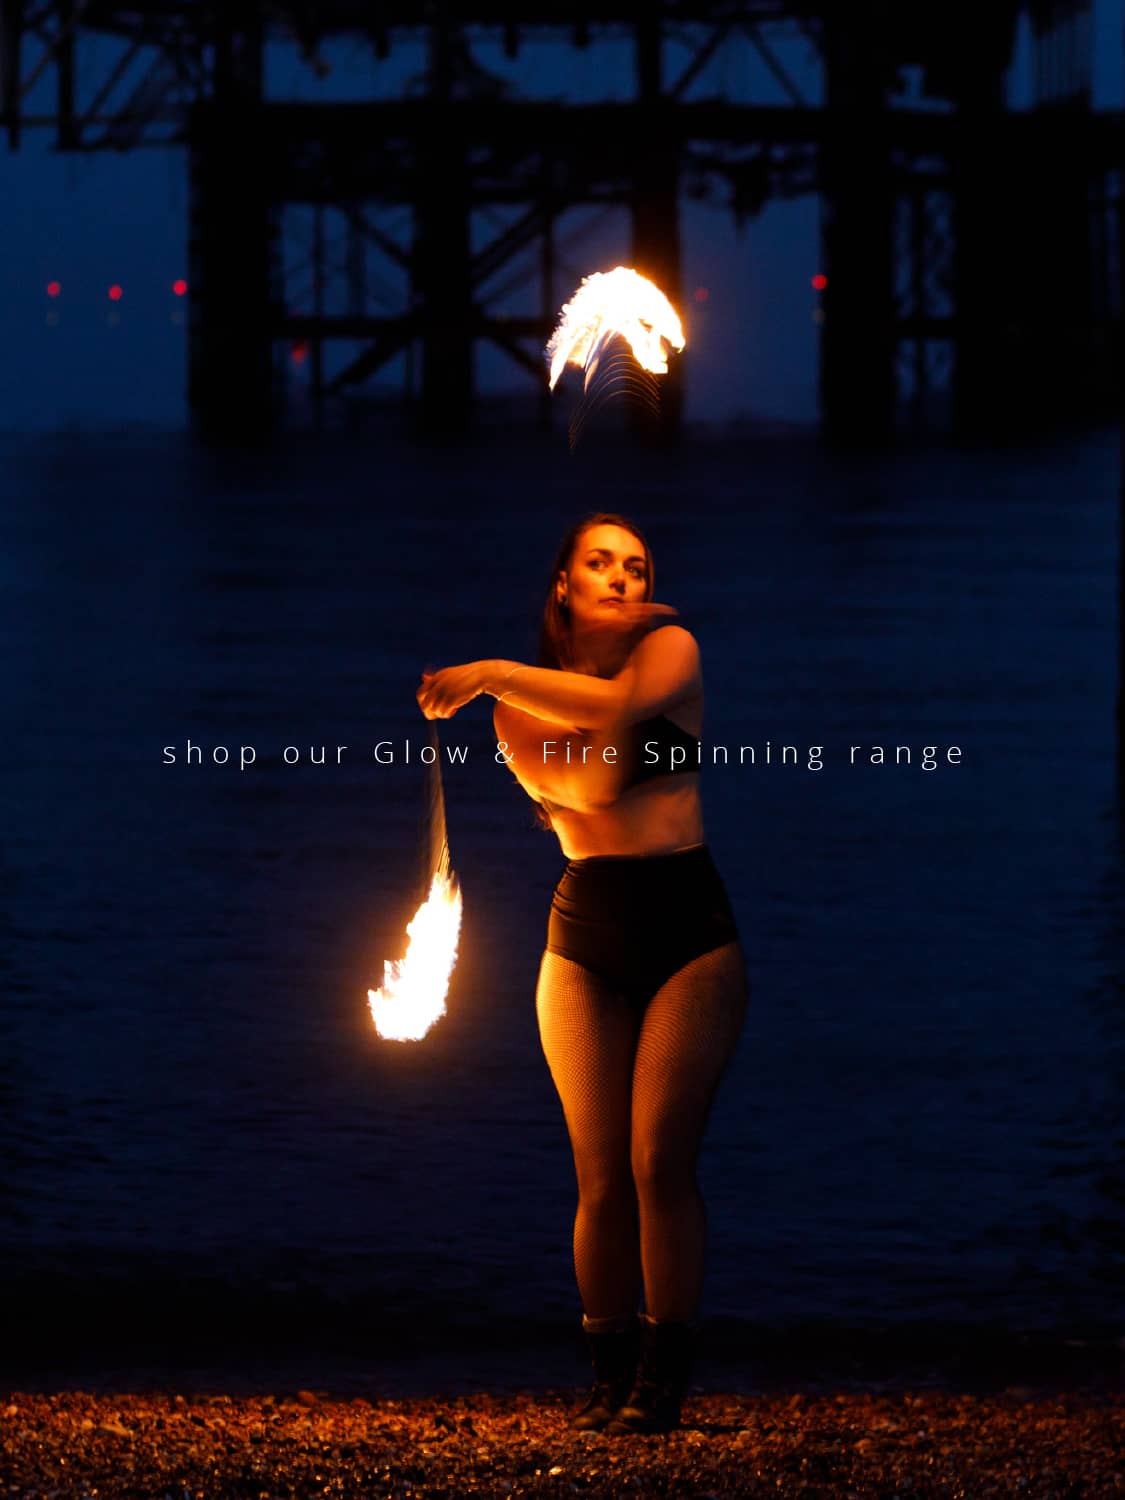 Fire poi being spun by a person standing on a pebble beach in front of a burnt out pier at night